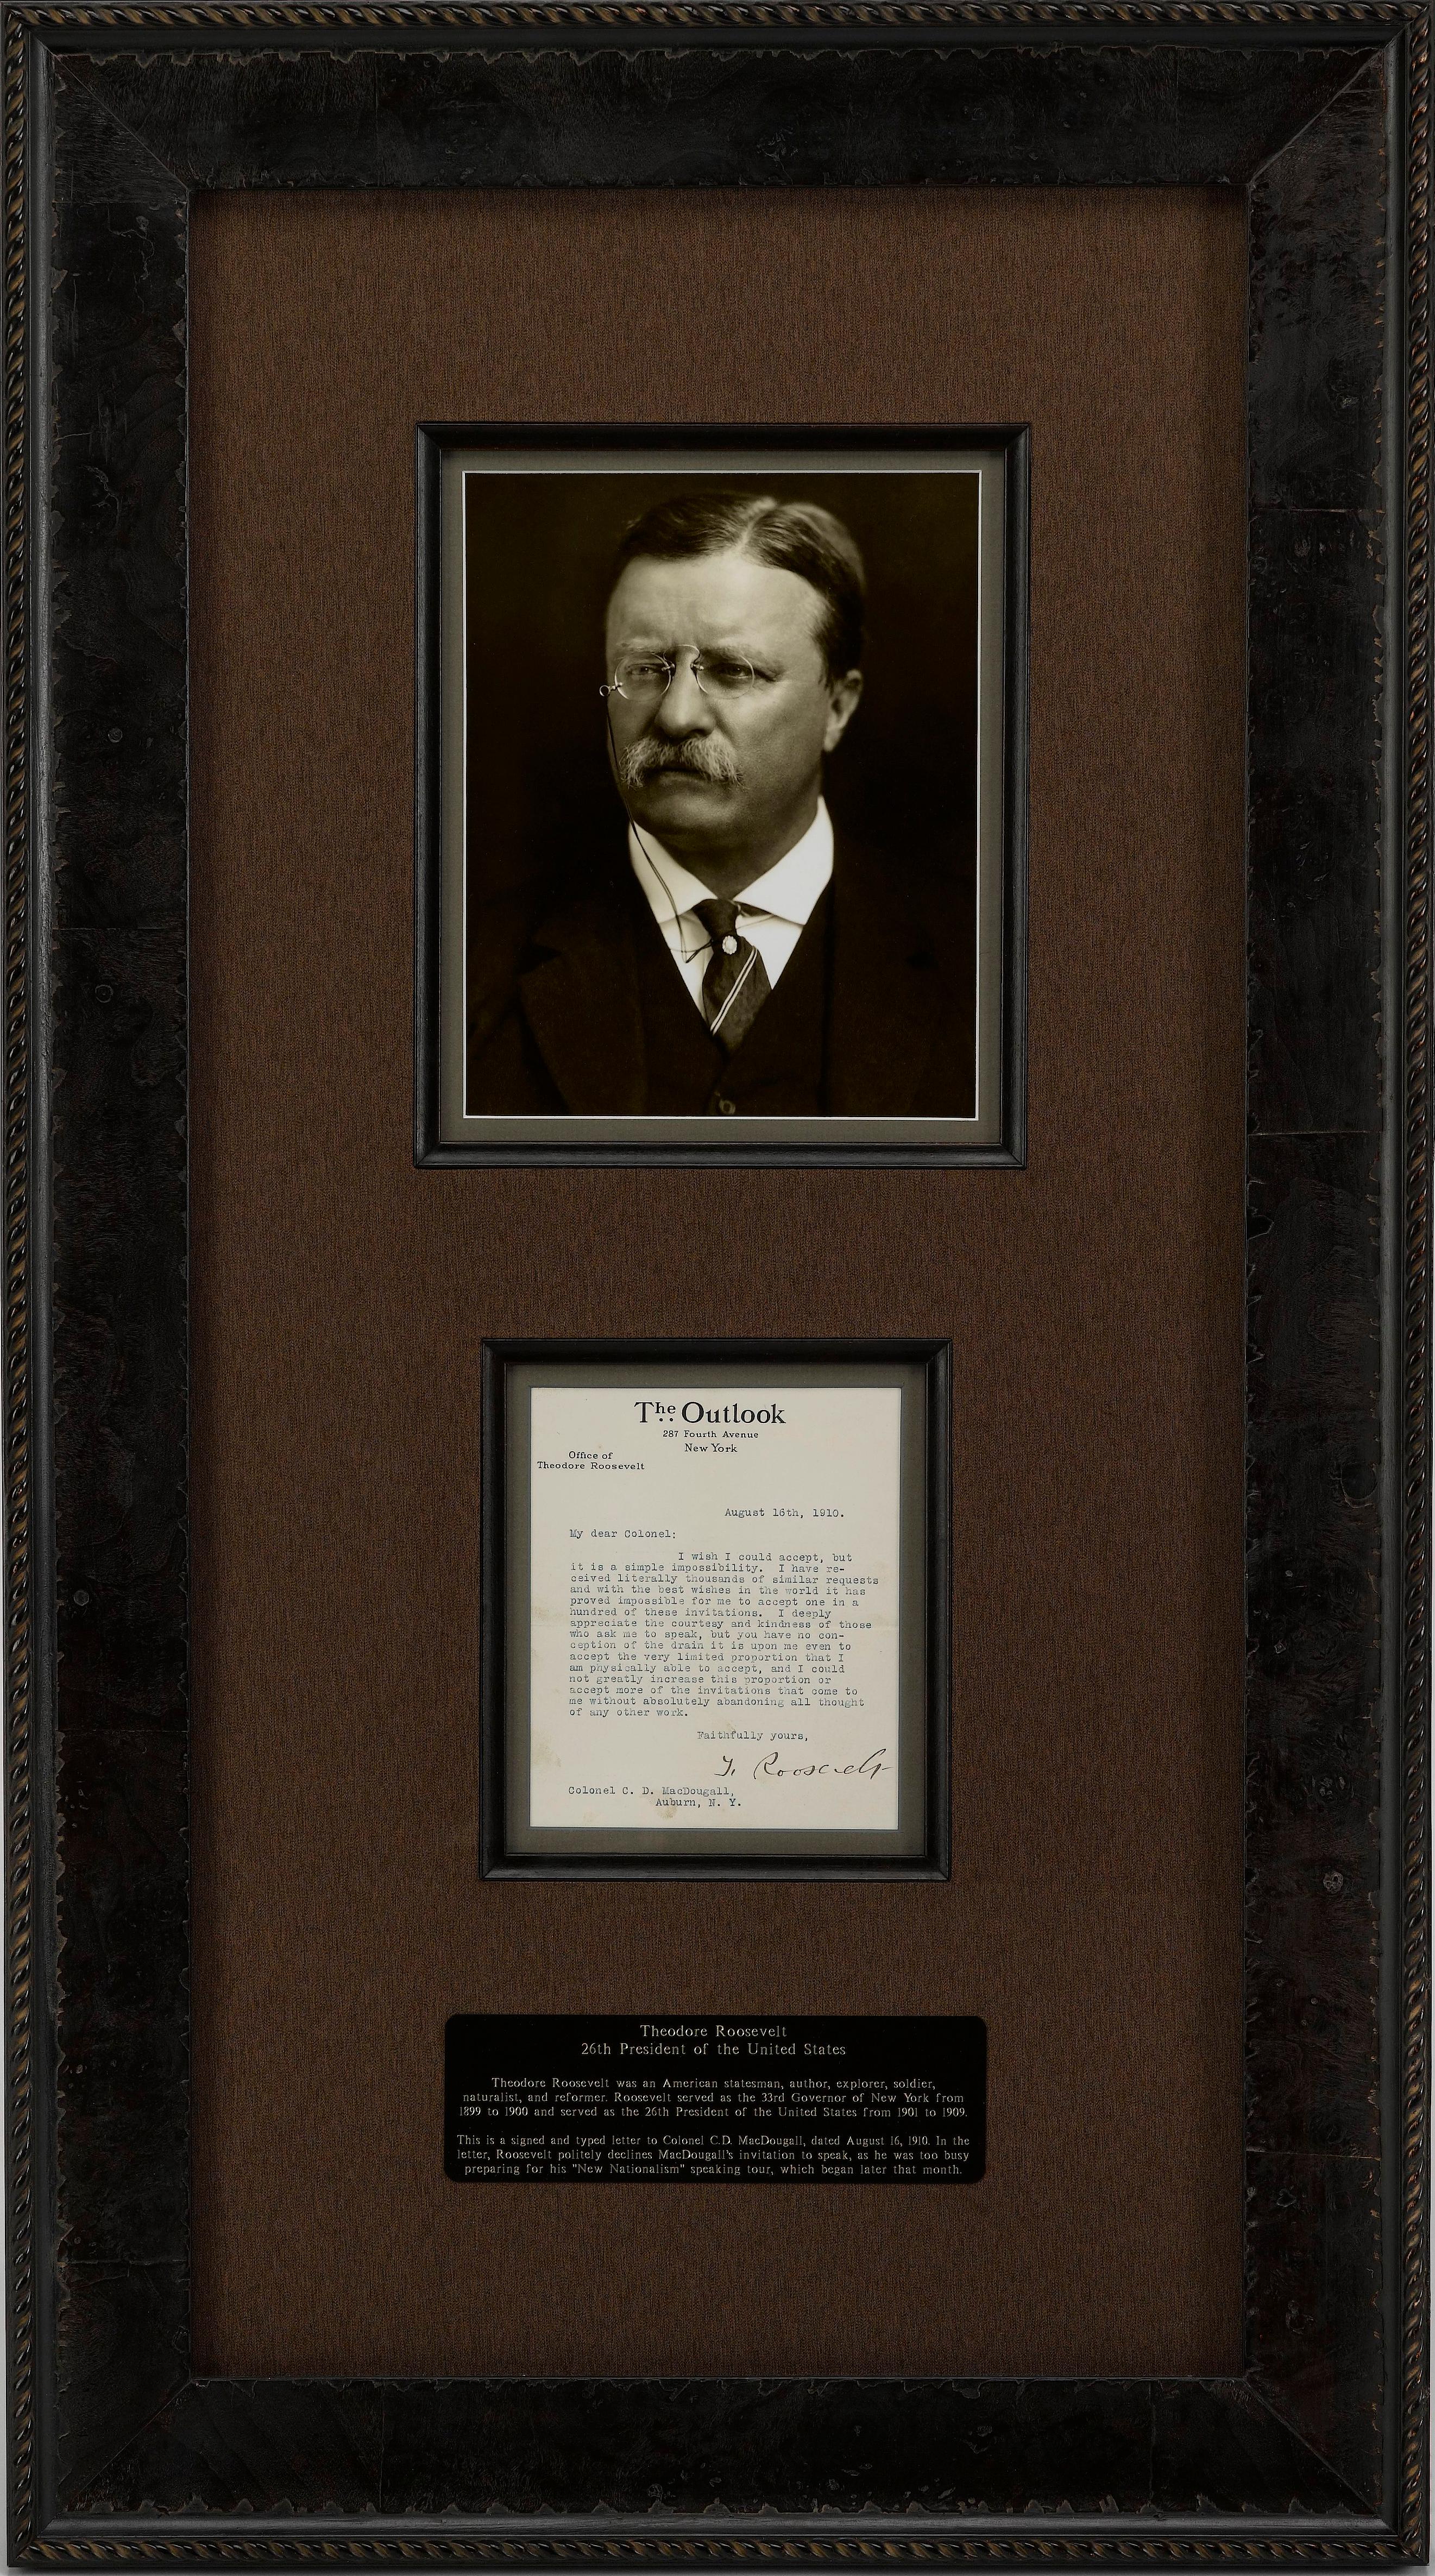 Presented is a Theodore Roosevelt signed letter to Colonel C. D. MacDougall, dated August 16, 1910. In the letter, Roosevelt politely declines MacDougall’s invitation to speak, as he is too busy preparing for his “New Nationalism” speaking tour,